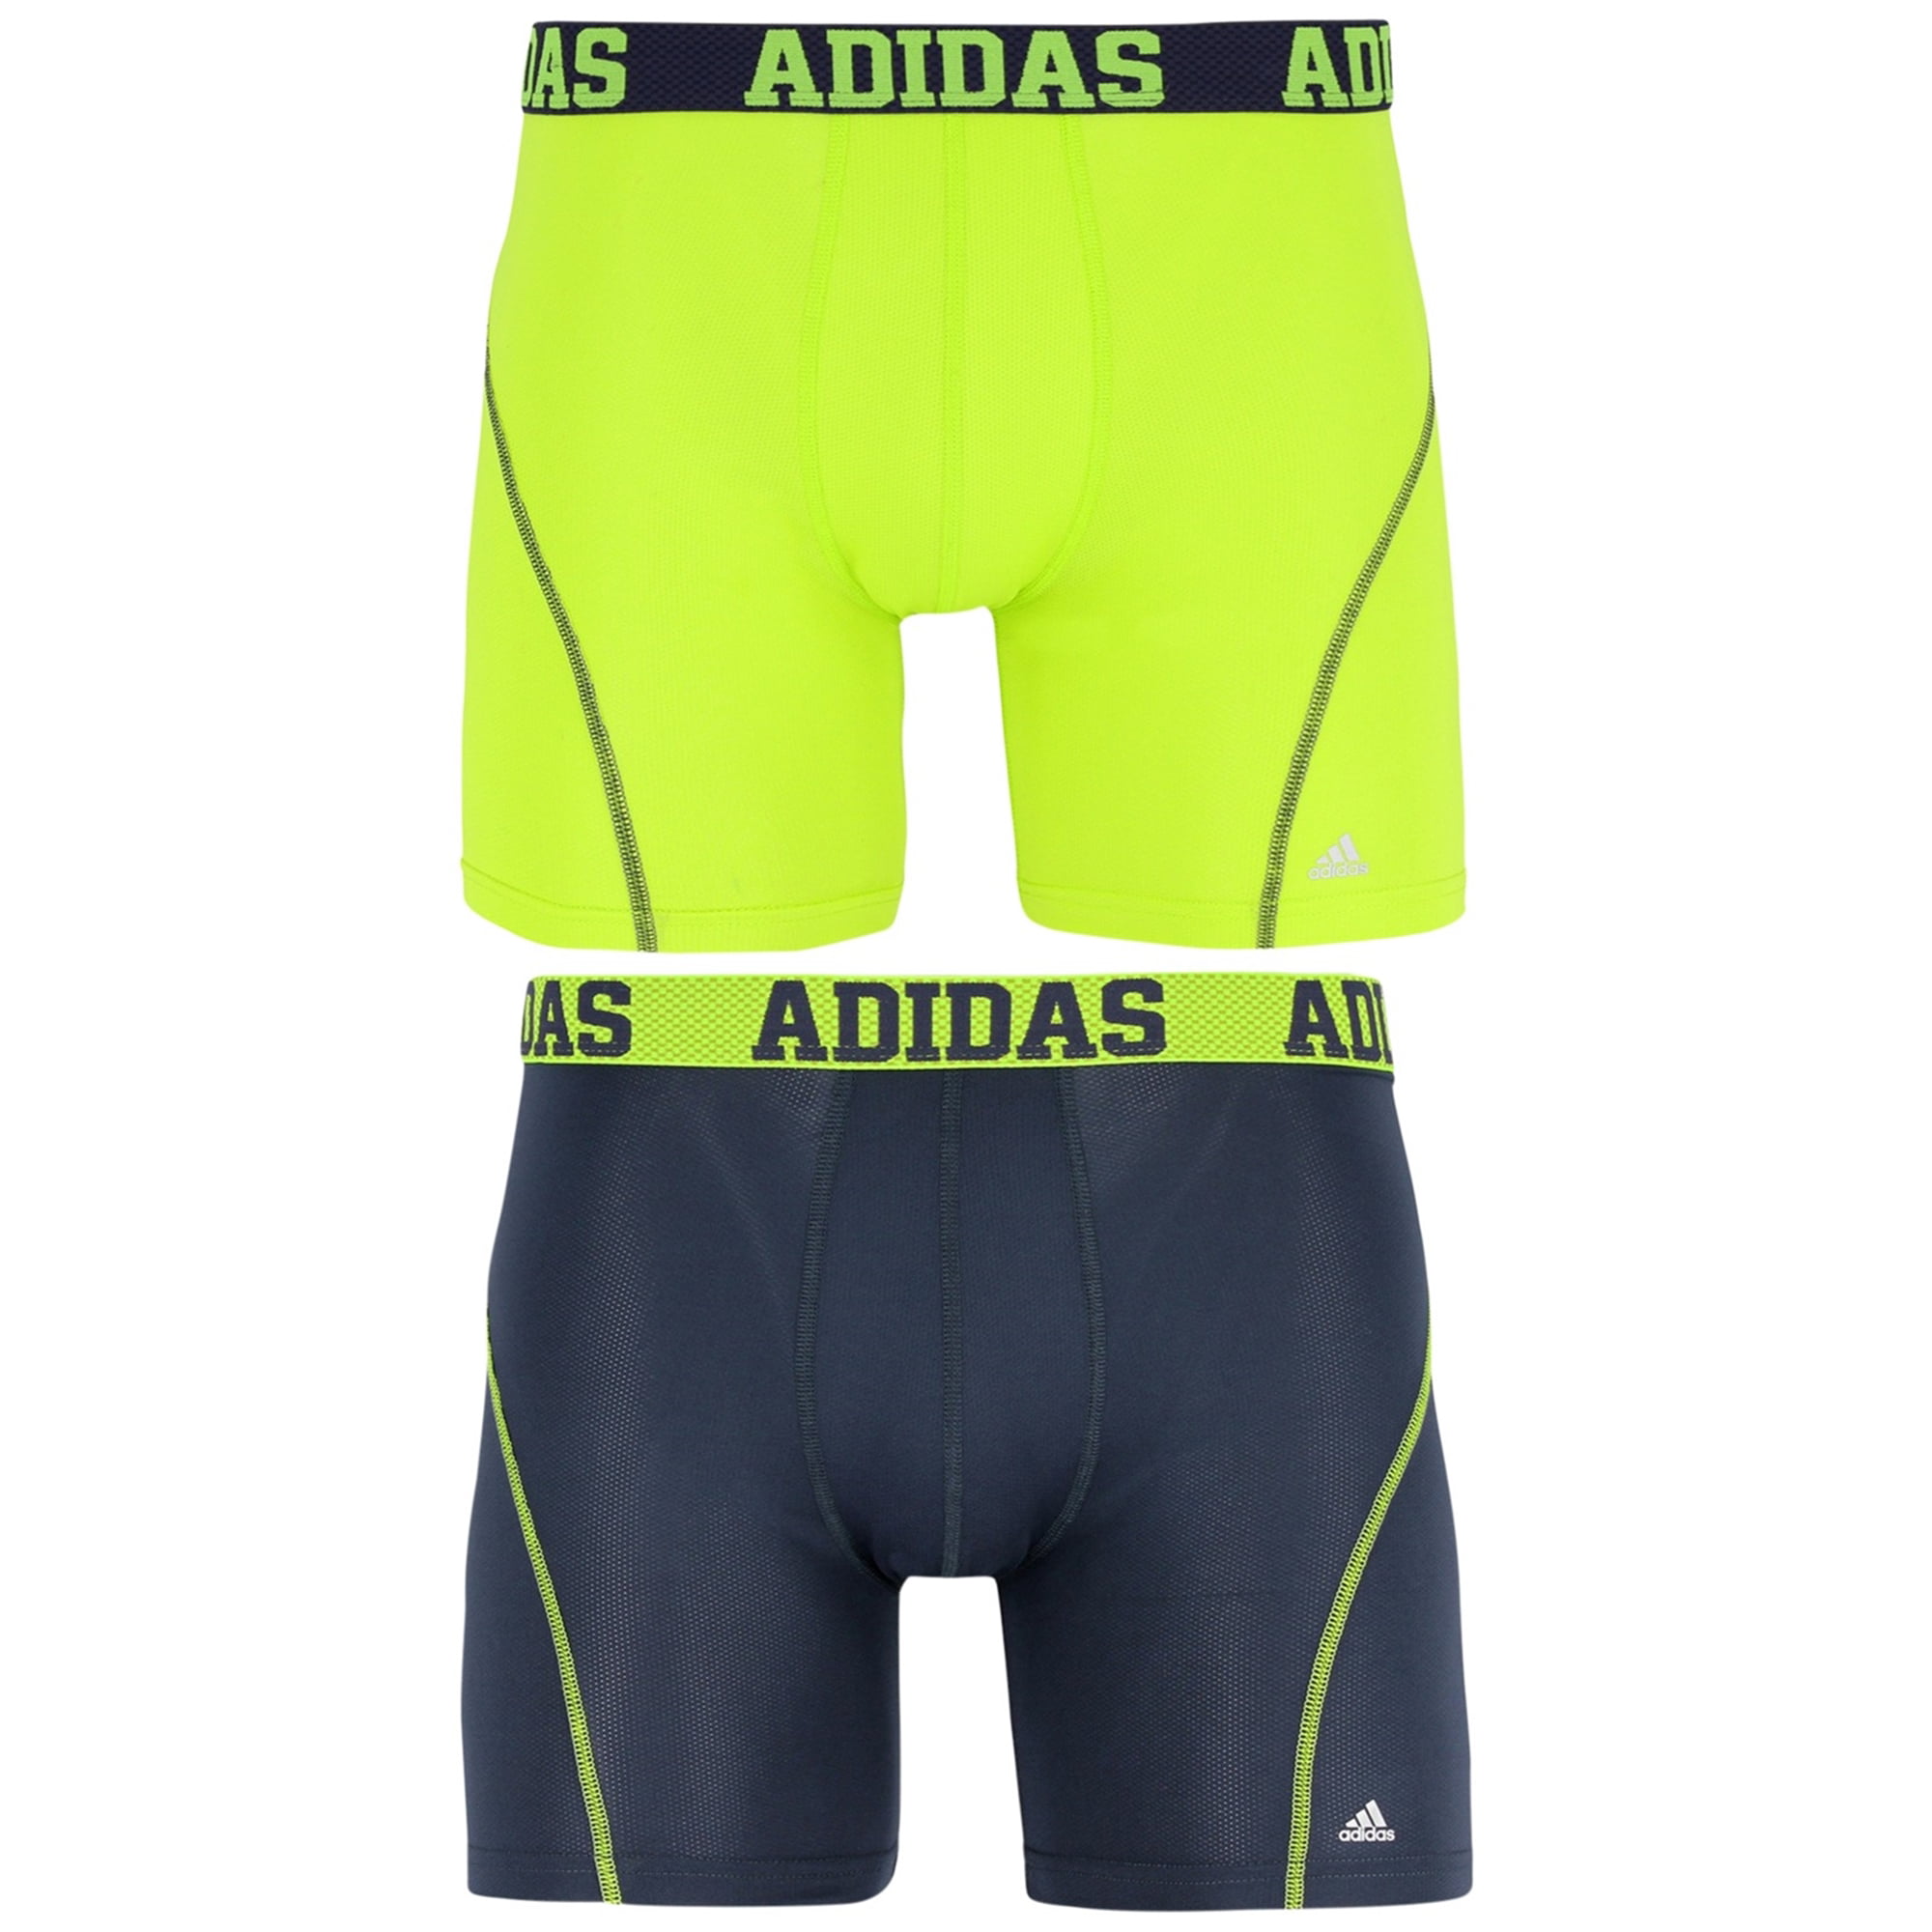 Adidas Mens Climacool Boxer Pack Multicoloured, Underwear Large 2 Briefs